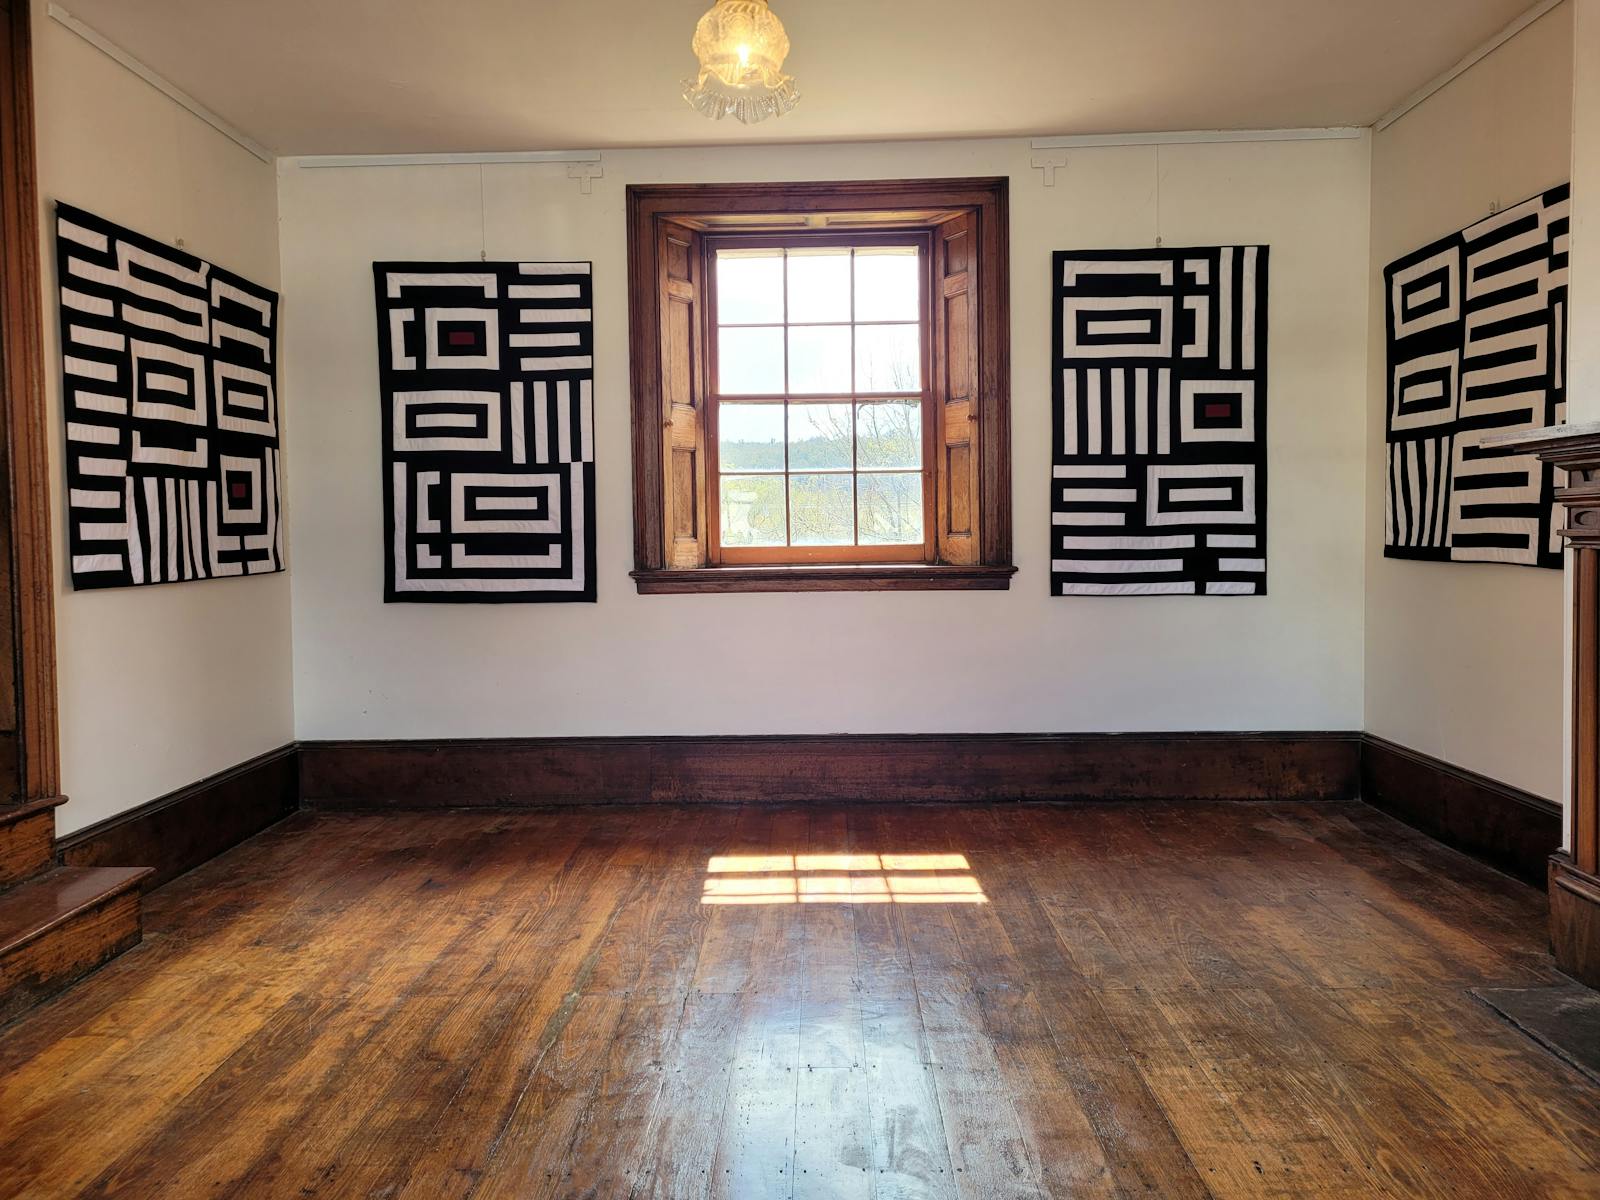 Four black and white quilts hanging in a white room with timber floor and large window.